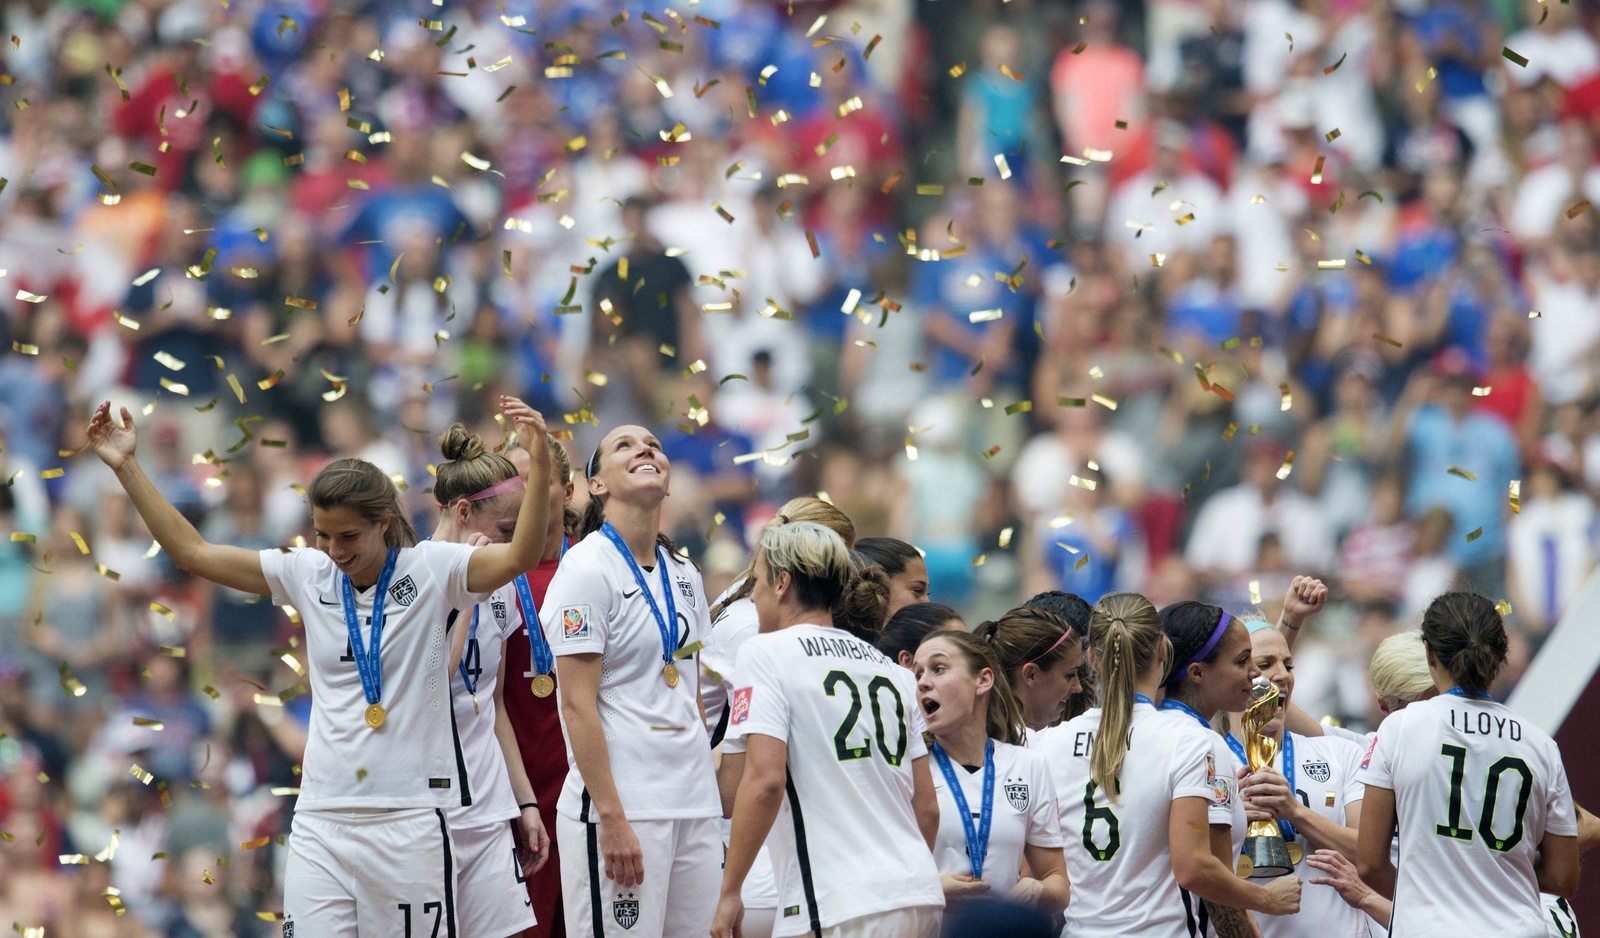 Members of the United States' celebrate their win over Japan at the FIFA Women's World Cup soccer championship in Vancouver, British Columbia, Canada, Sunday, July 5, 2015.   (Jonathan Hayward/The Canadian Press via AP) MANDATORY CREDIT